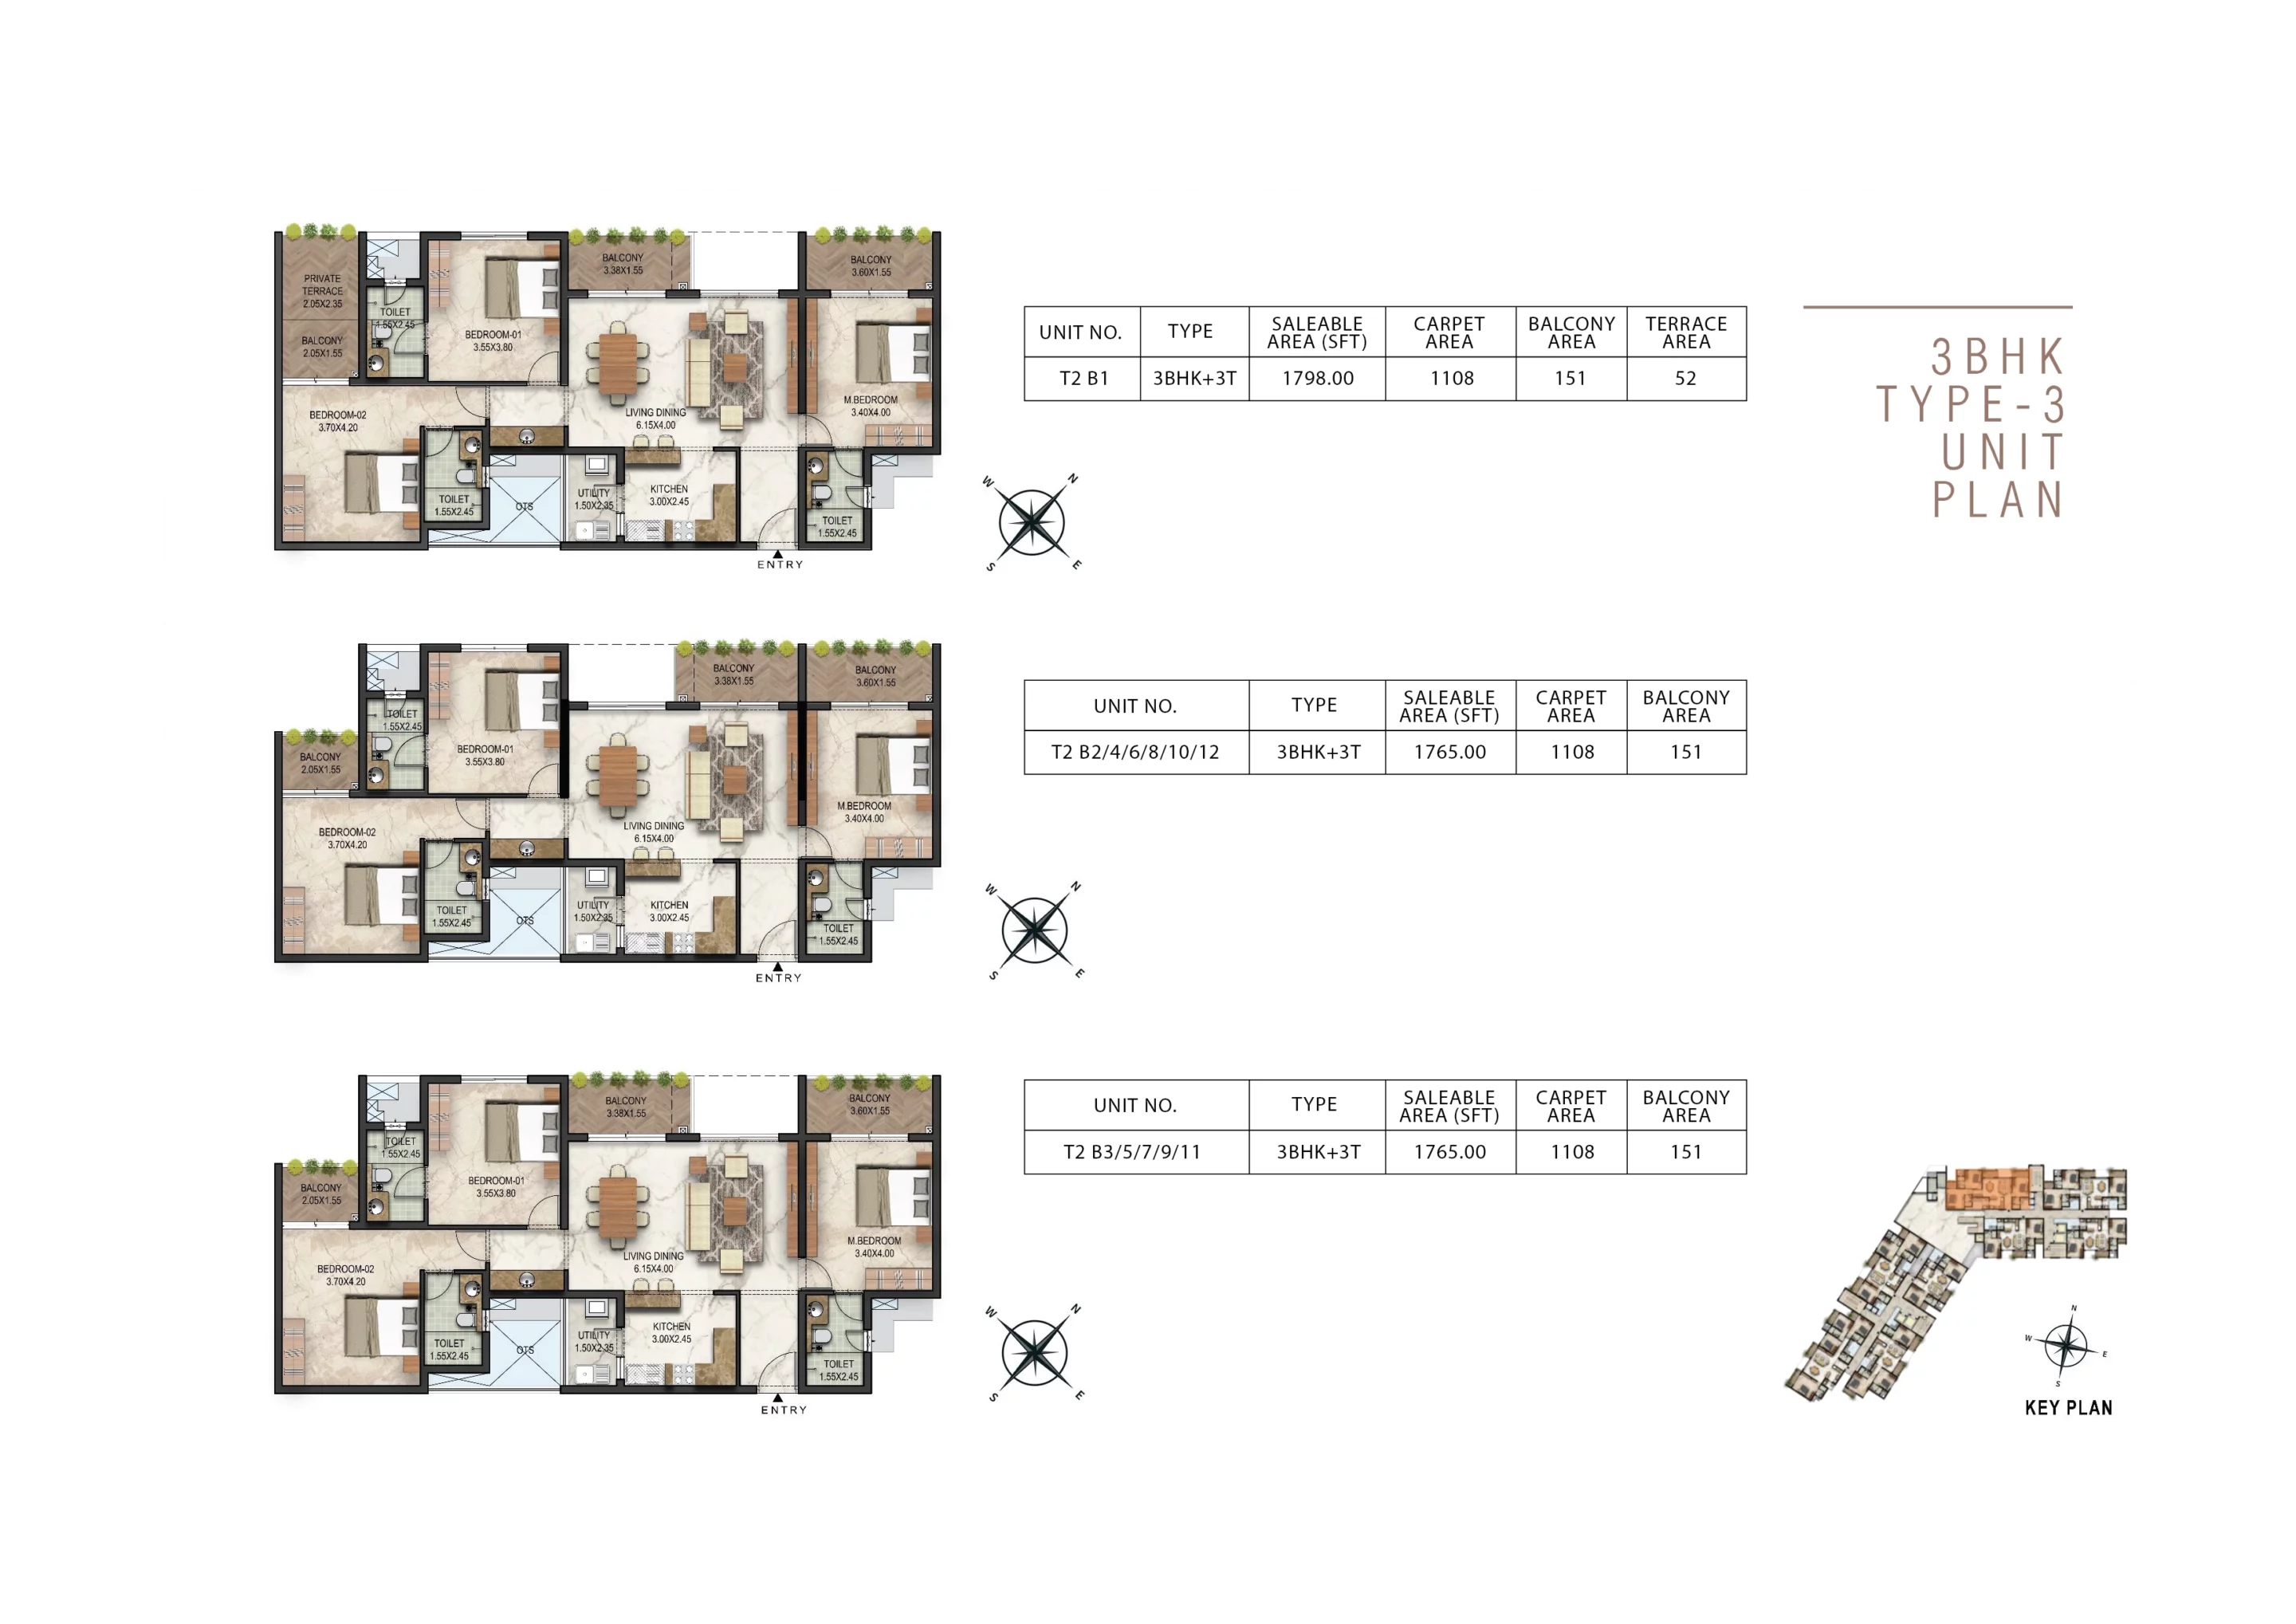 3 bhk type-3 unit plan with 3 toilets luxury apartment floor plan starting at 1700sqft in tower 1 with terrace area and balcony area in akkulam trivandrum